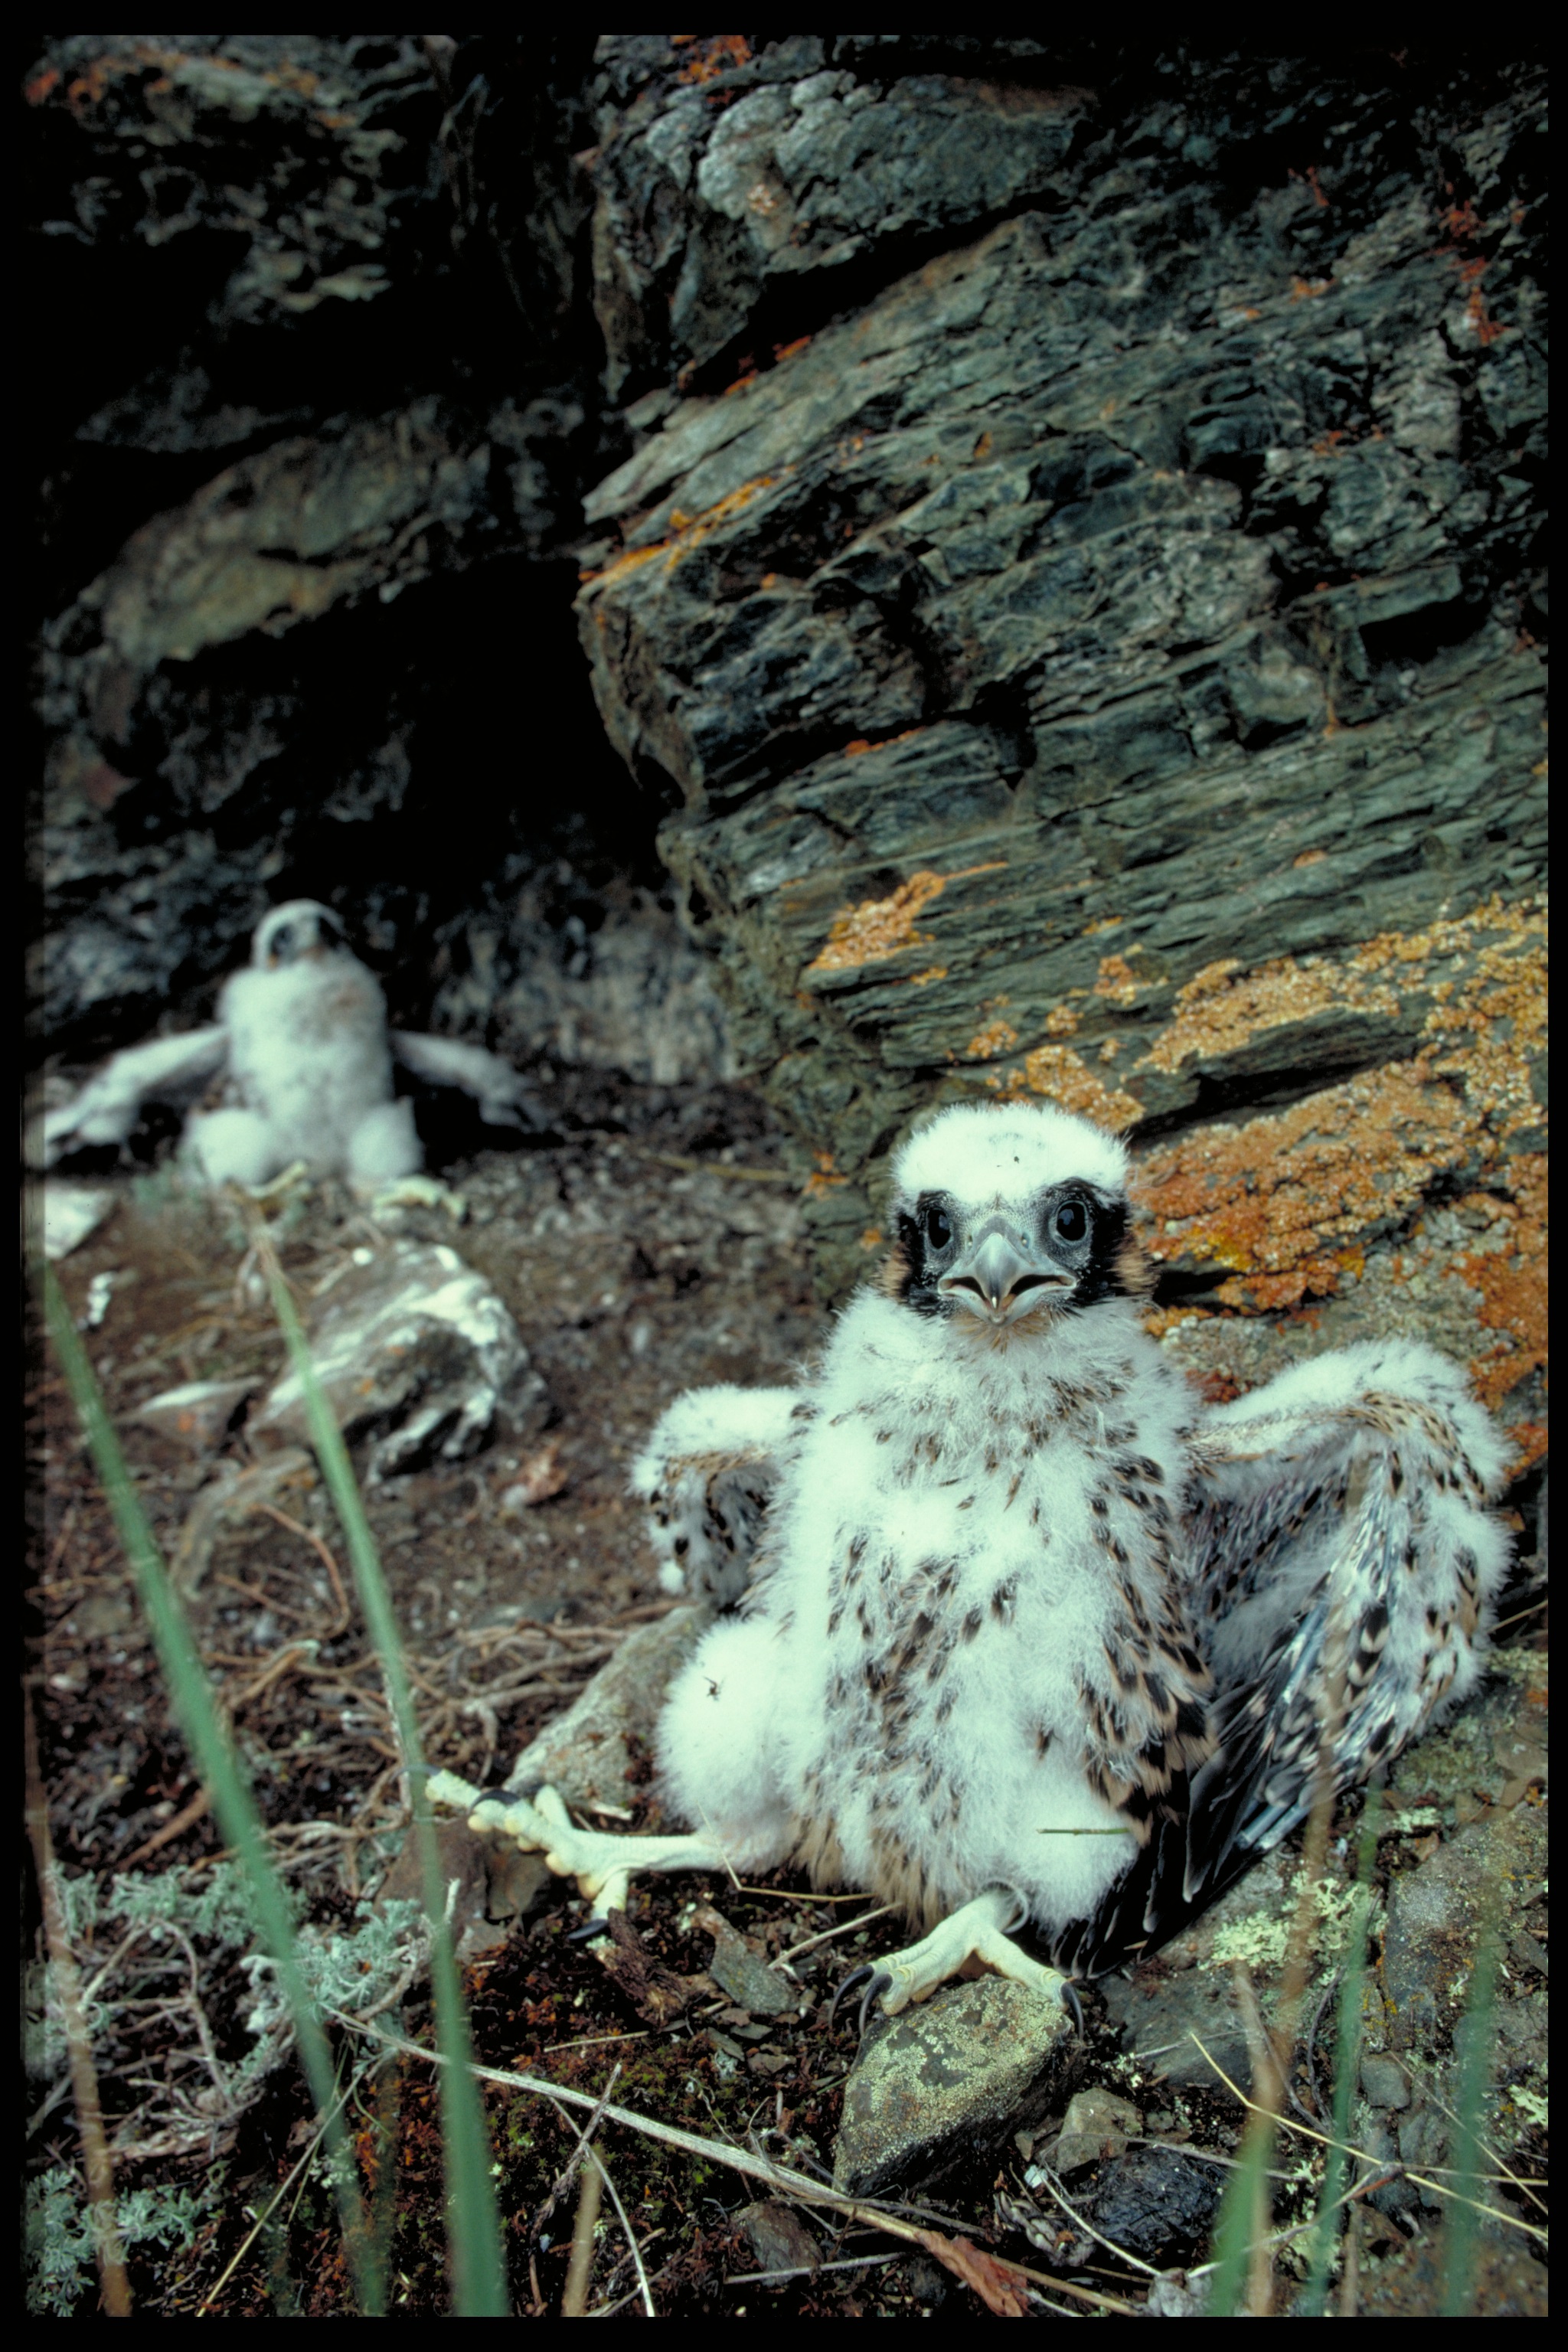 A young peregrine falcon nestling covered in white down with patches of brown feathers sits on a rocky ledge. Another nestling is in the background.